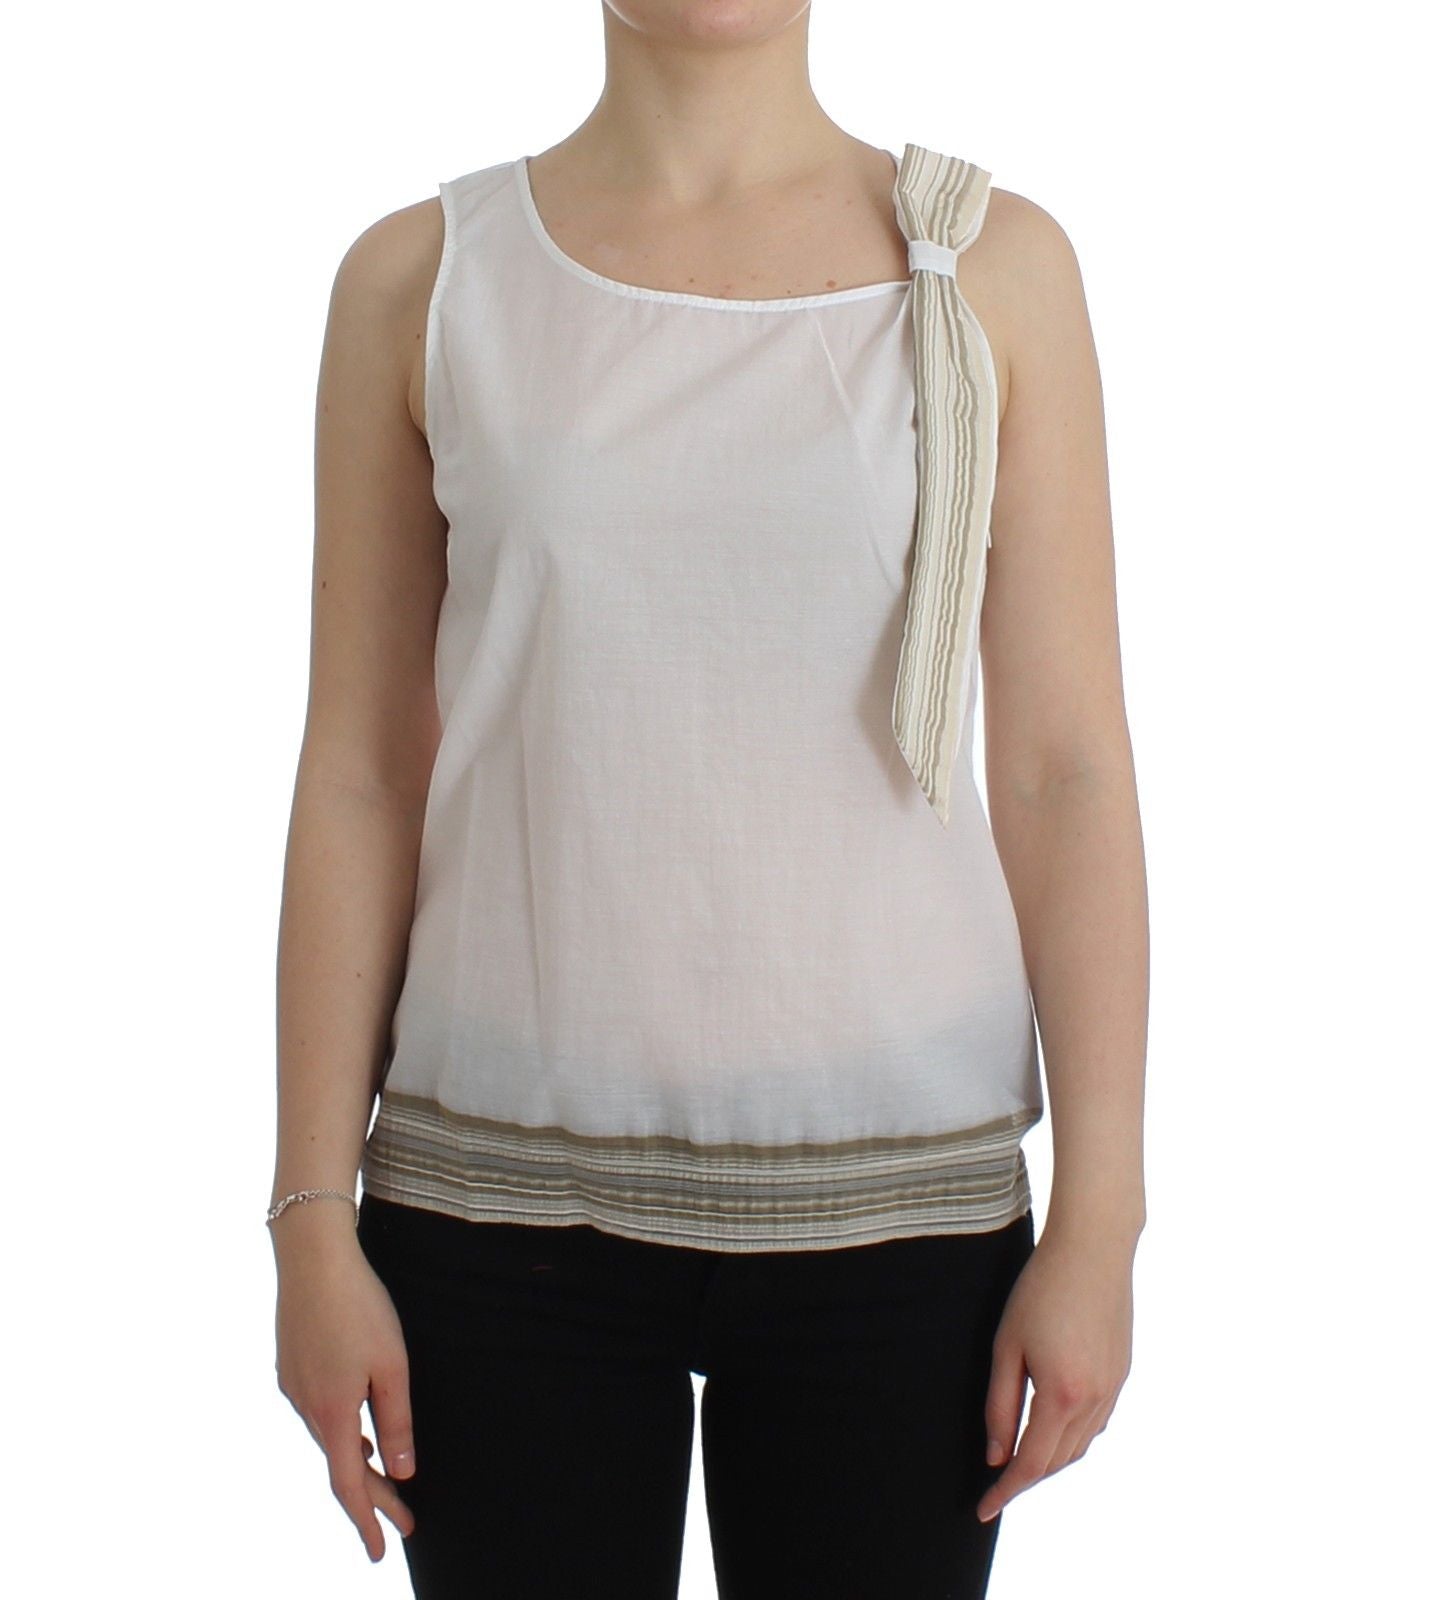 Buy White Top Blouse Tank Shirt Sleeveless by Ermanno Scervino